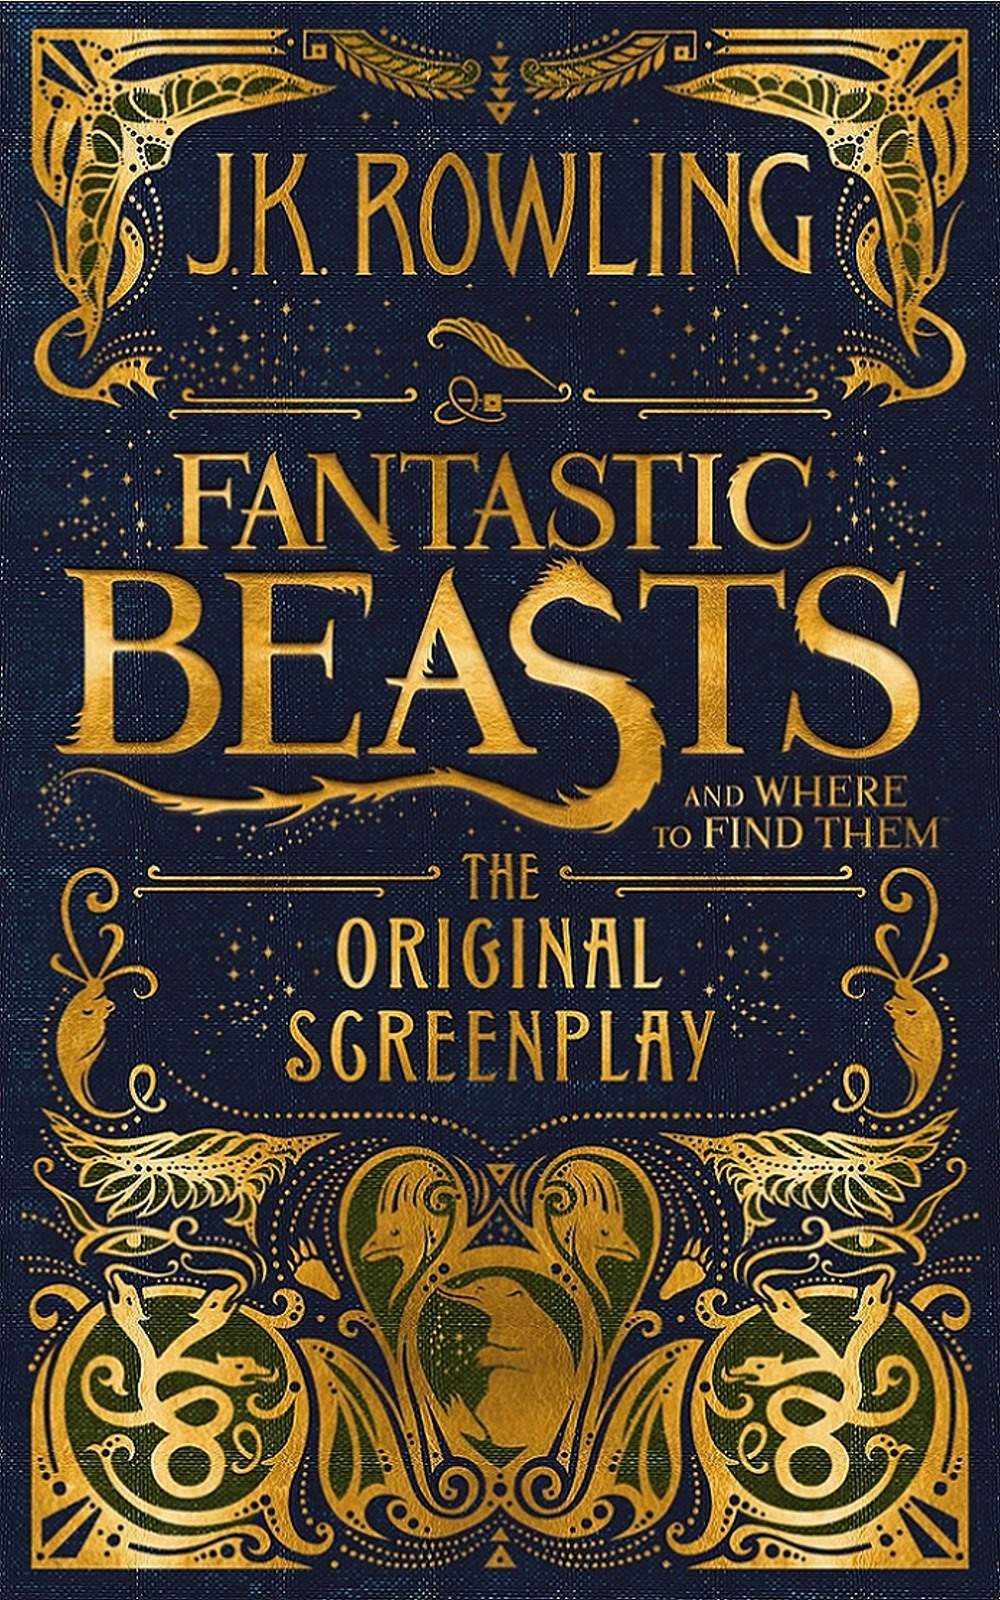 Fantastic Beasts and where to Find Them: The Original Screenplay怪獸與牠們的產地電影原著劇本